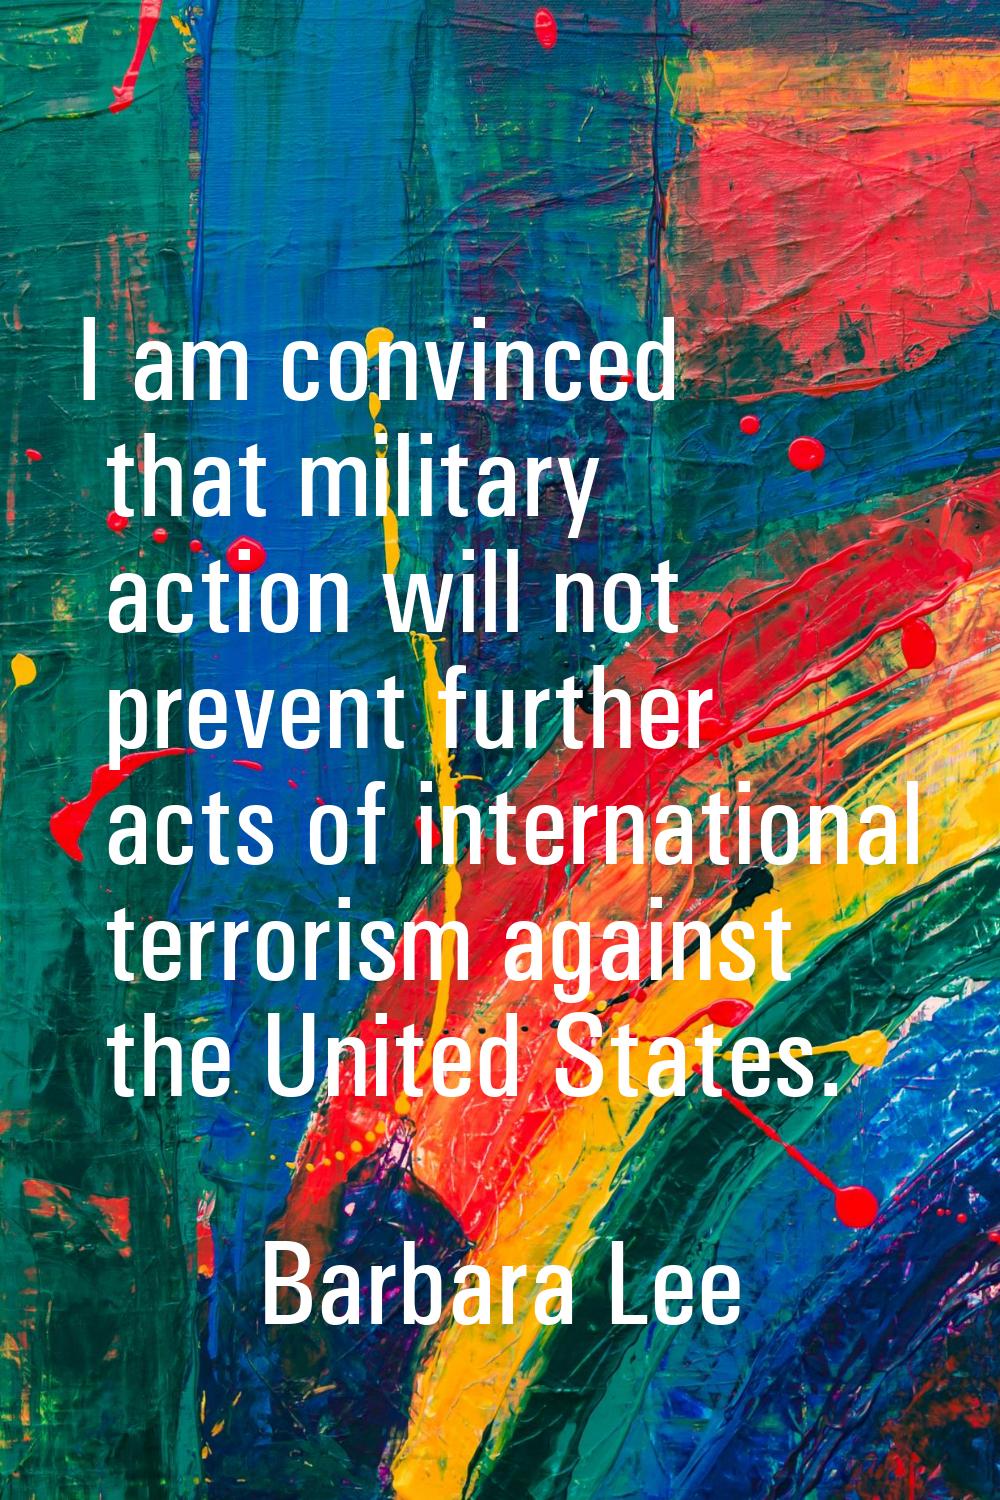 I am convinced that military action will not prevent further acts of international terrorism agains